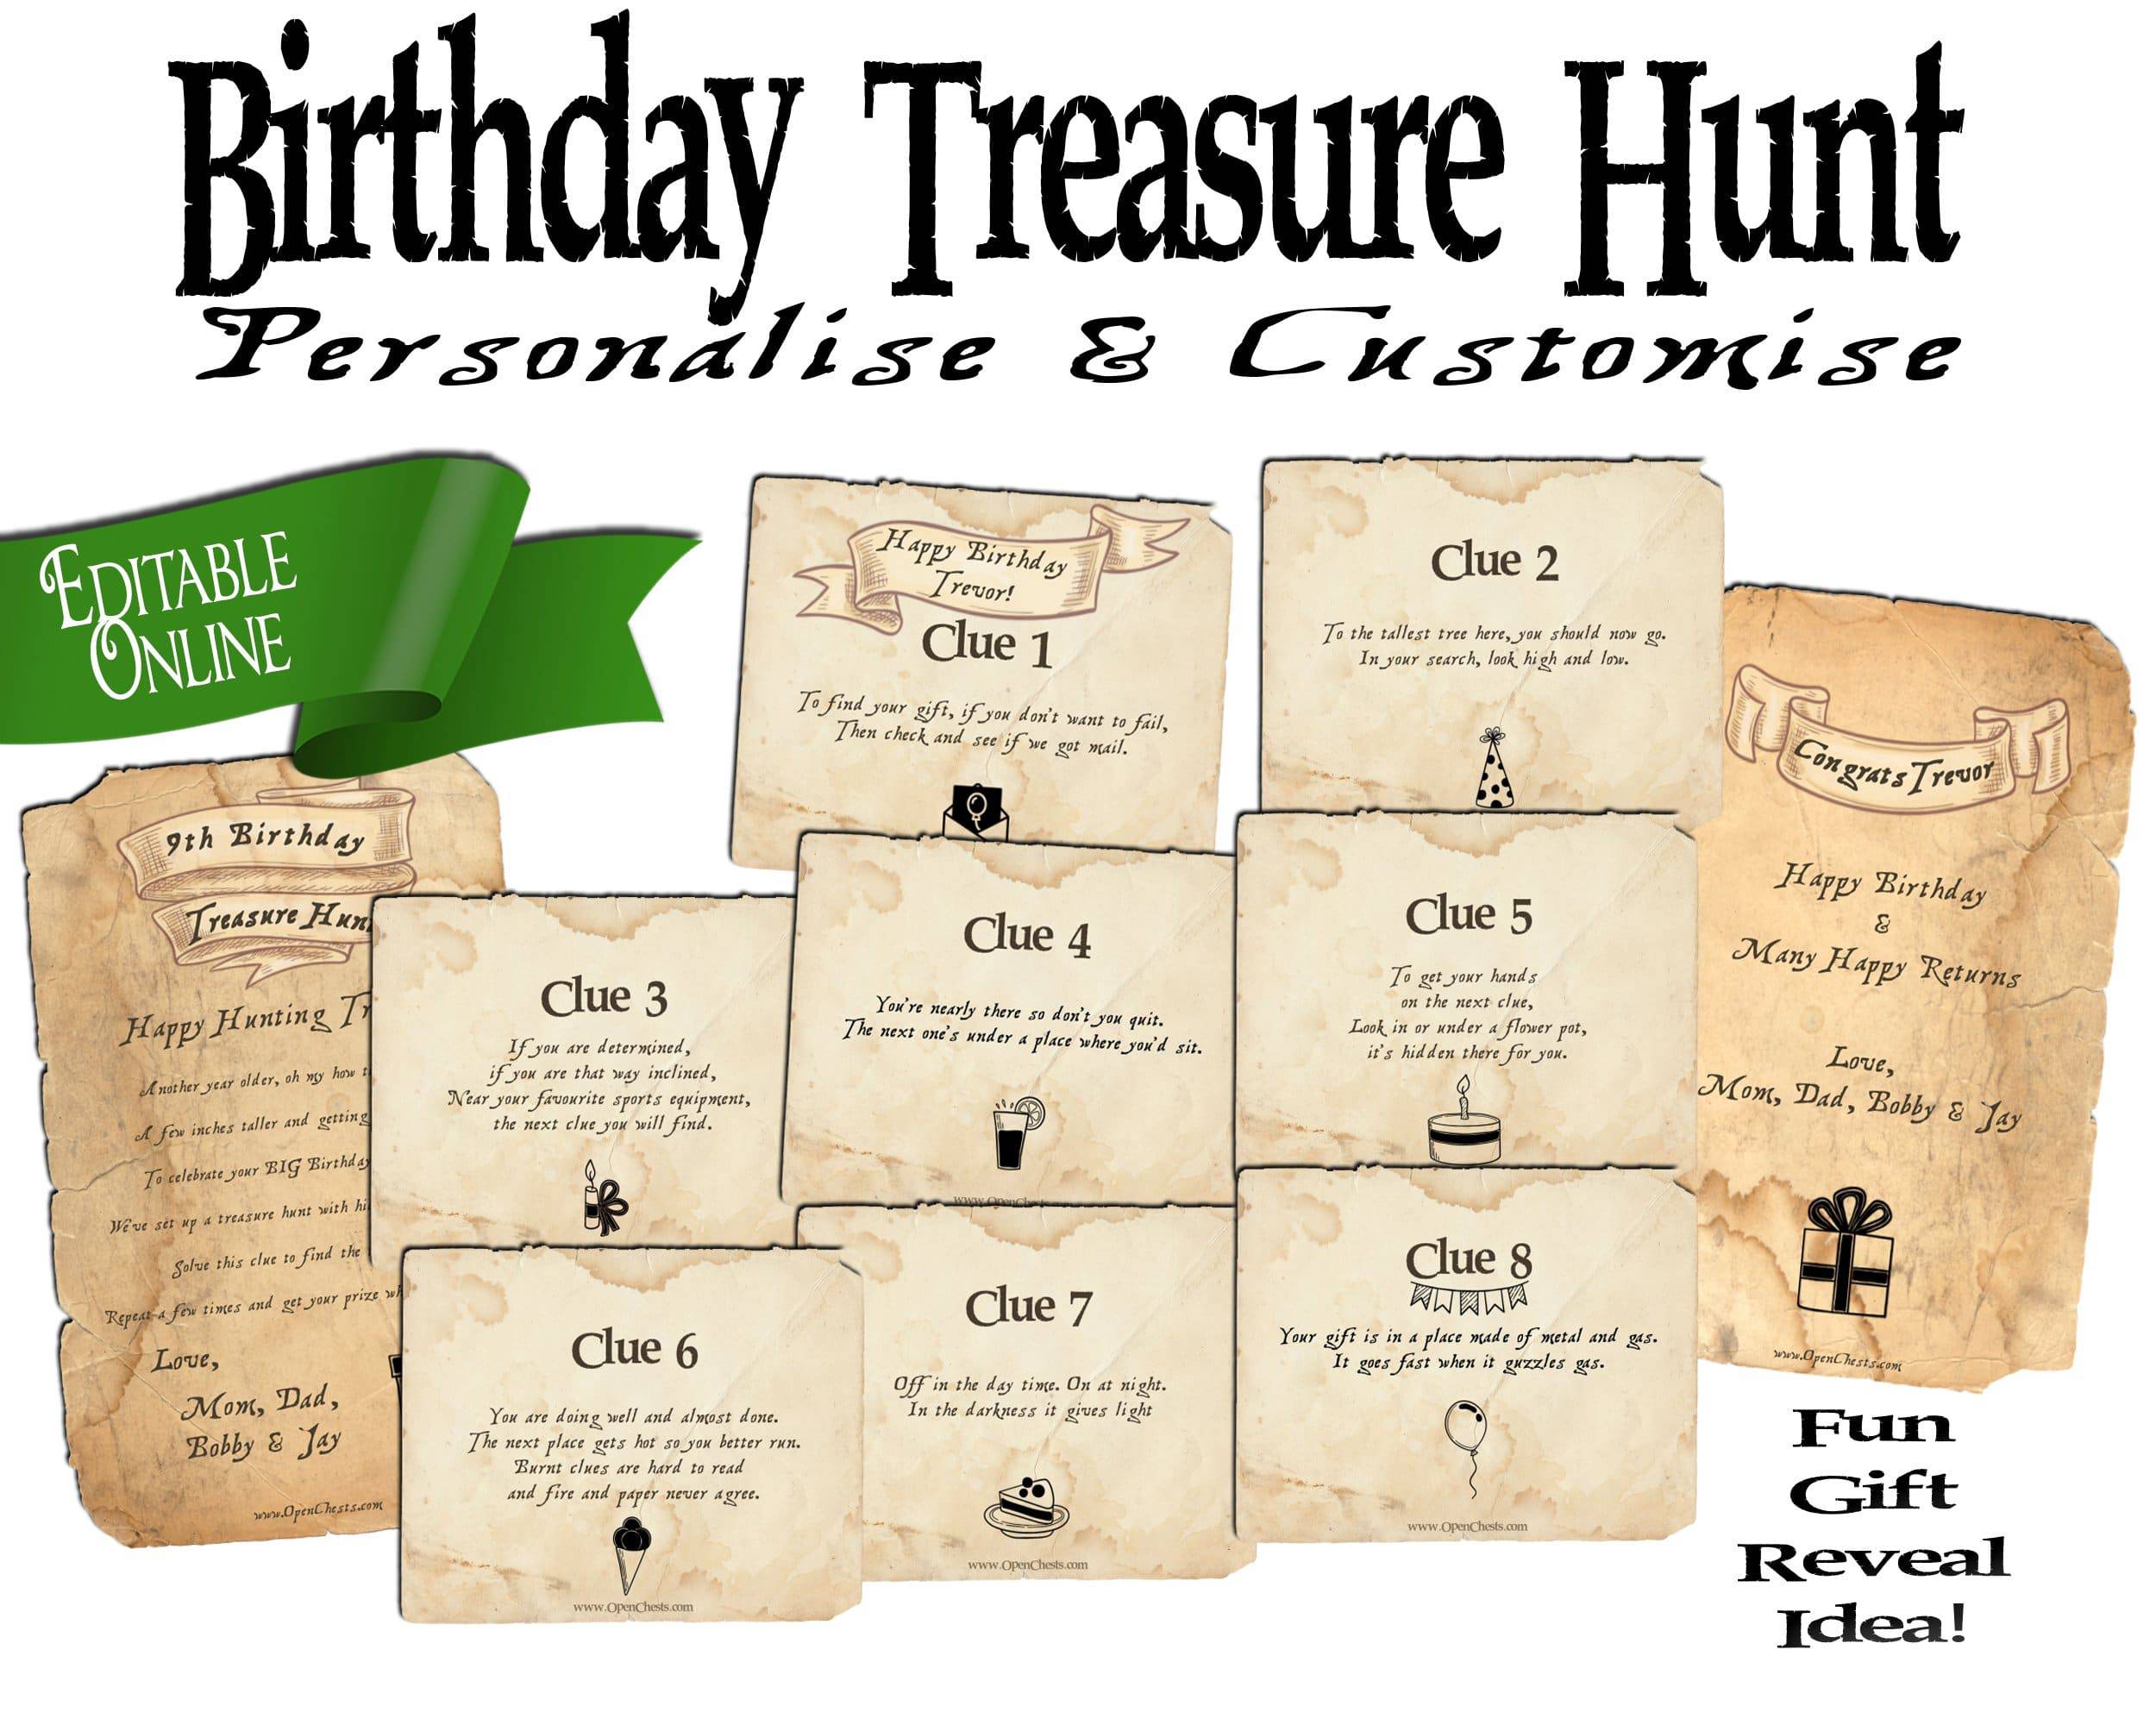 Searching for Treasures to sell on